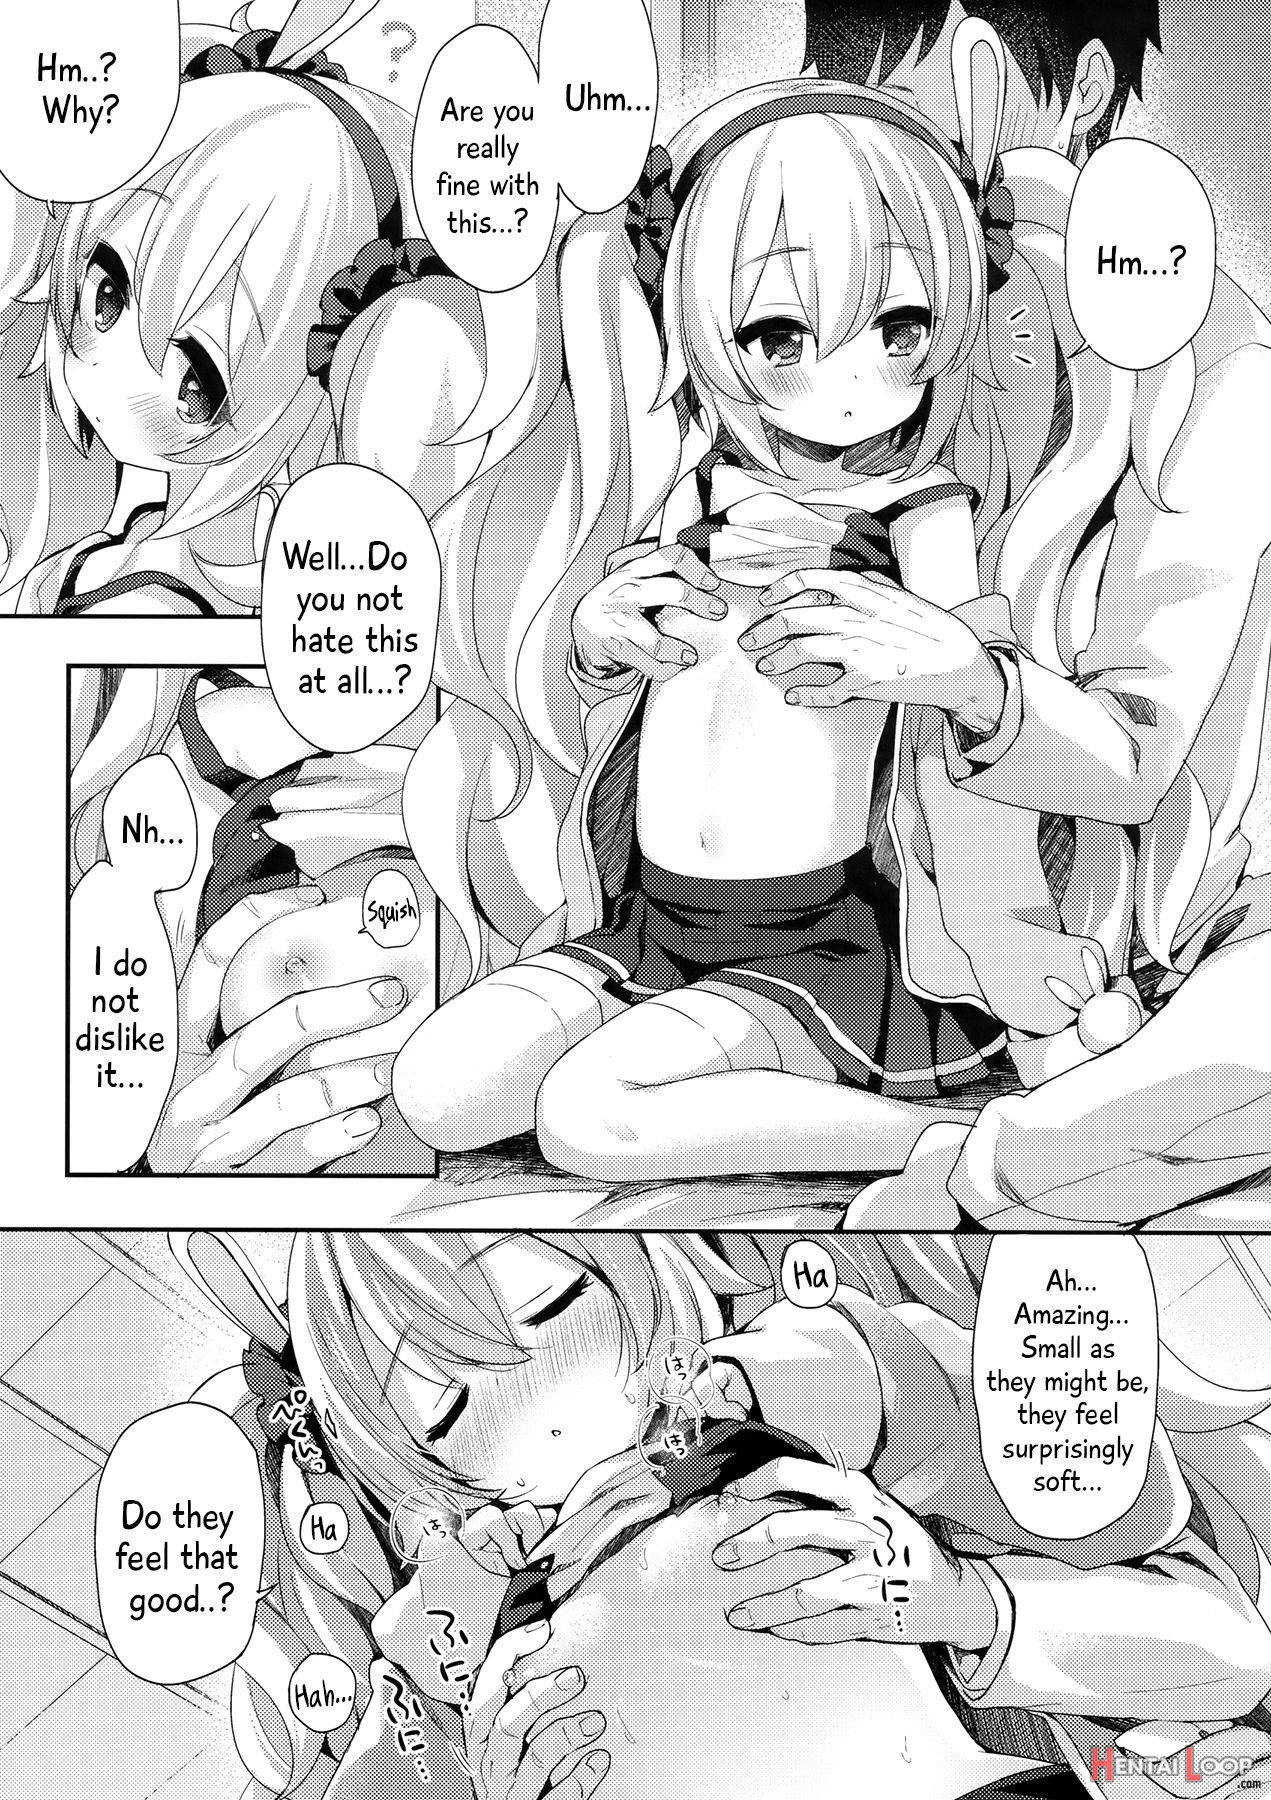 Commander, Will You... With Laffey? page 8